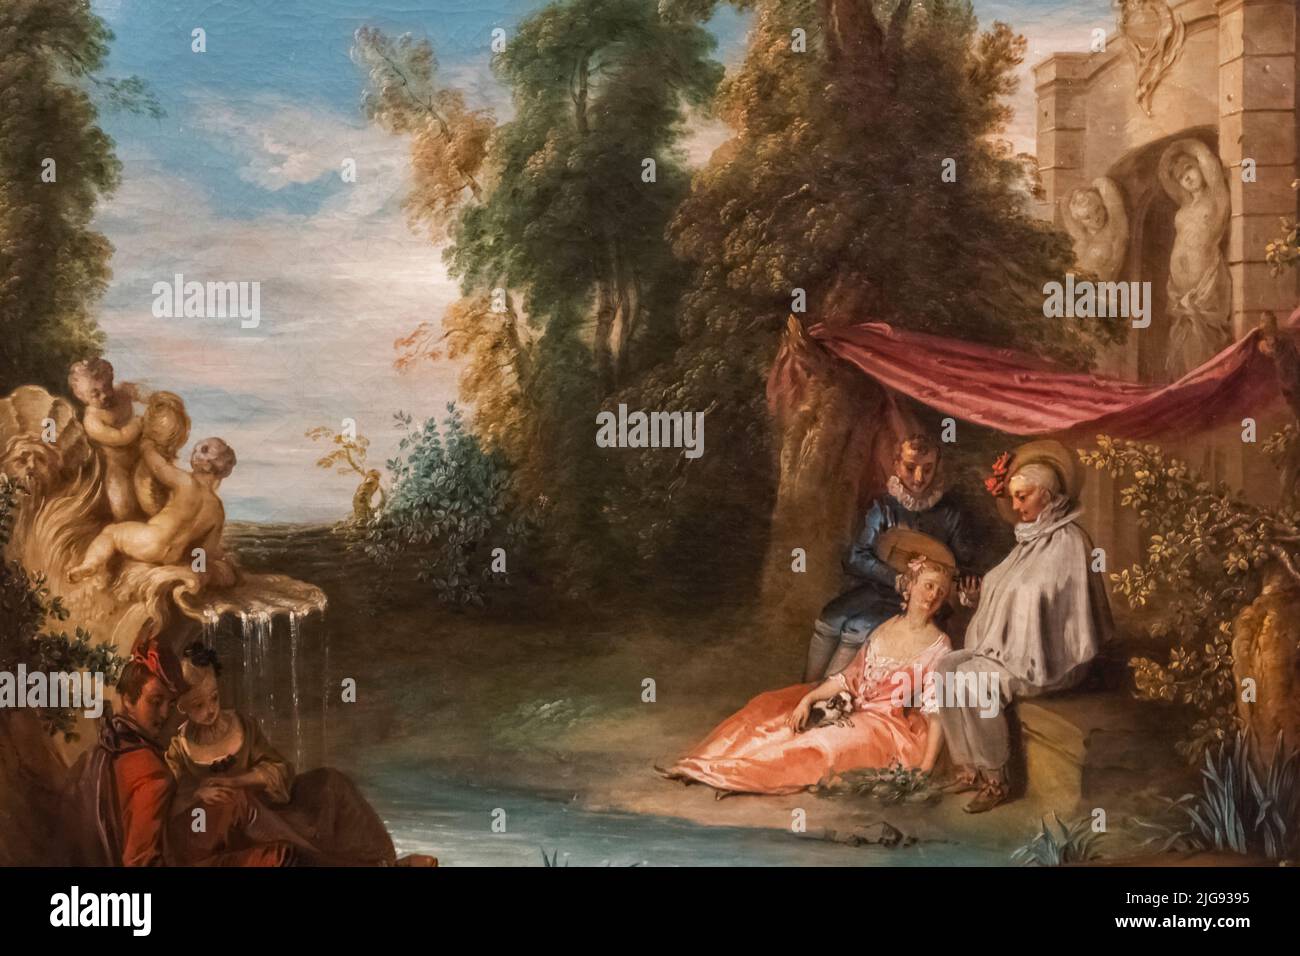 Painting titled 'Comedians by a Fountain' by German Artist Philip Mercier dated 1735 Stock Photo